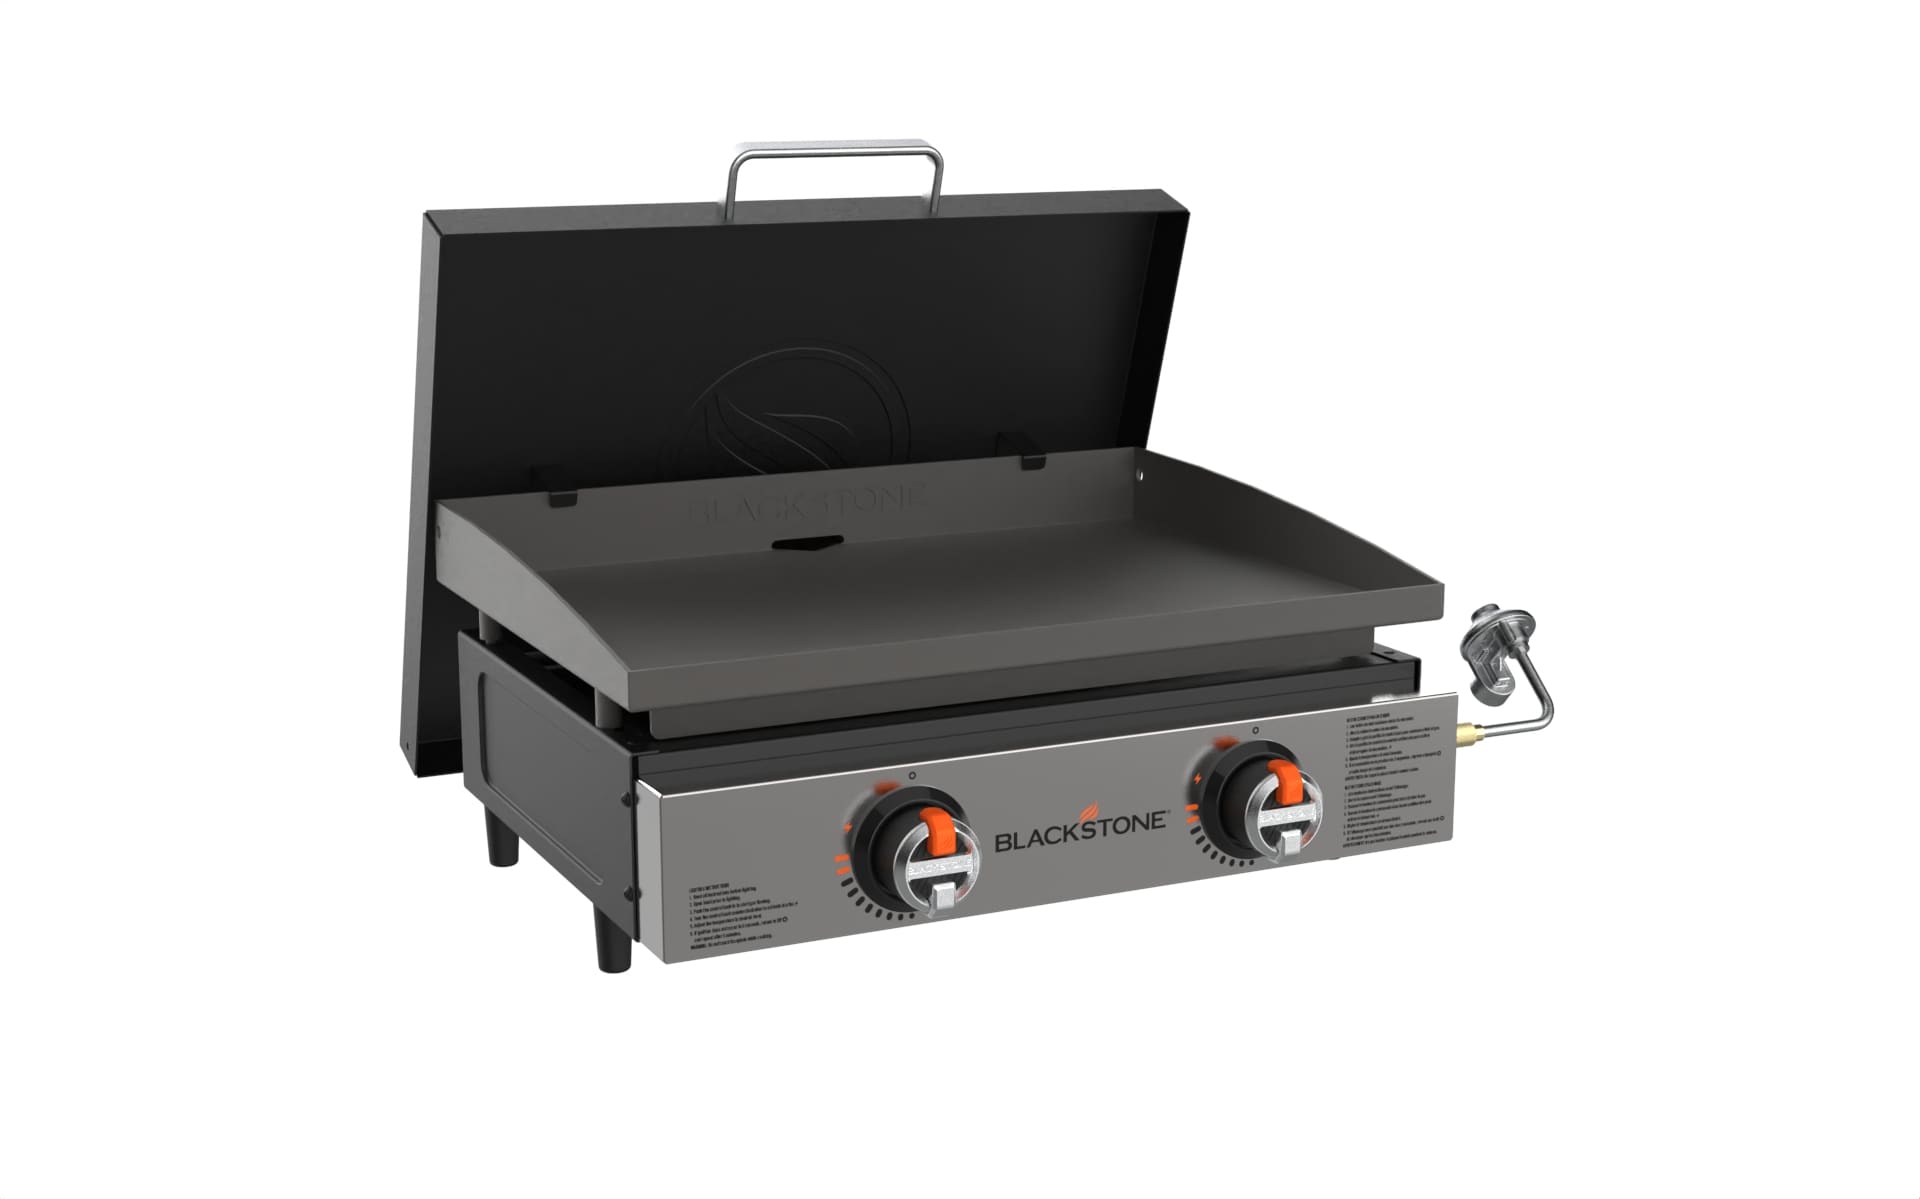  QuliMetal Portable Griddle Flat Top Grill 22 Inch Table Top  Grill with Hood 2 Burner Propane Grill with Carry Bag Outdoor Griddle  Camping Griddle 24,000 BTU 348 Sq 304 Stainless Steel